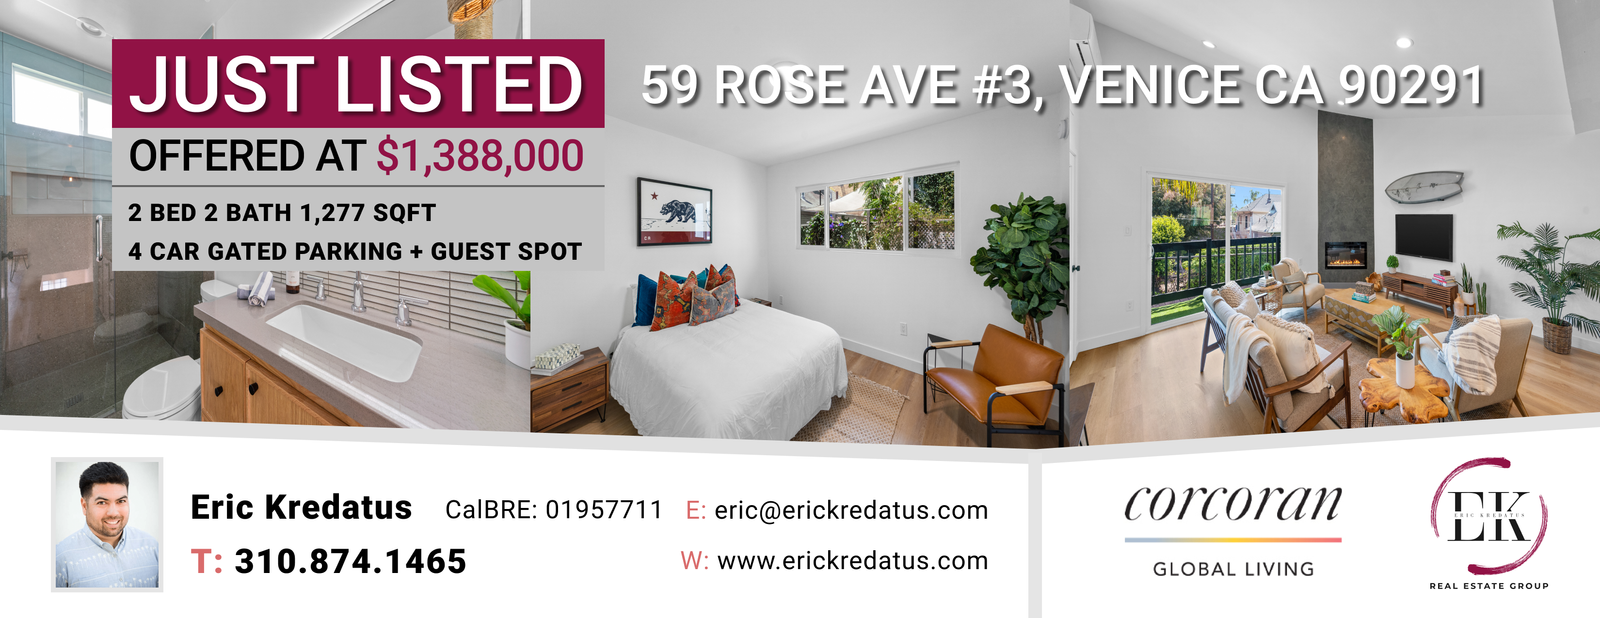 just listed in venice